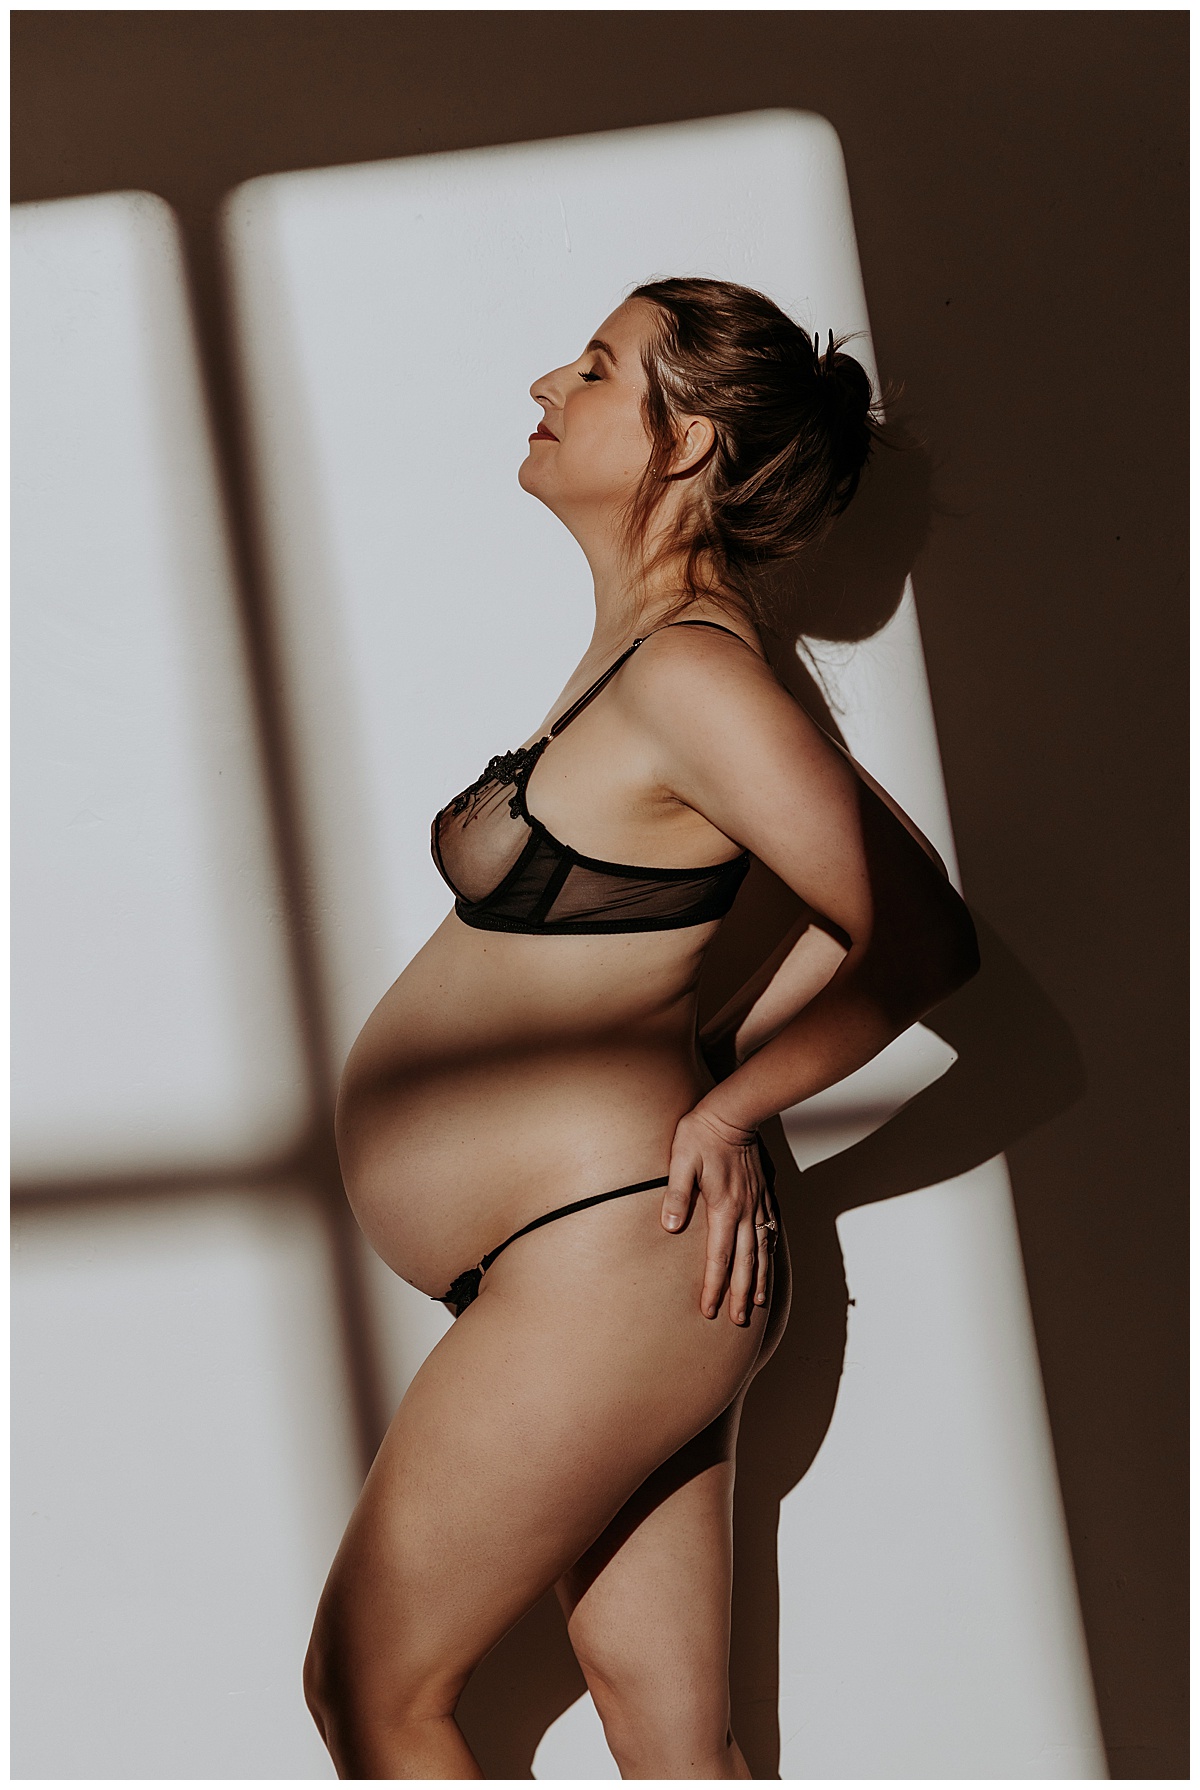 Mama grabs body and embraces pregnancy for Maternity Boudoir session